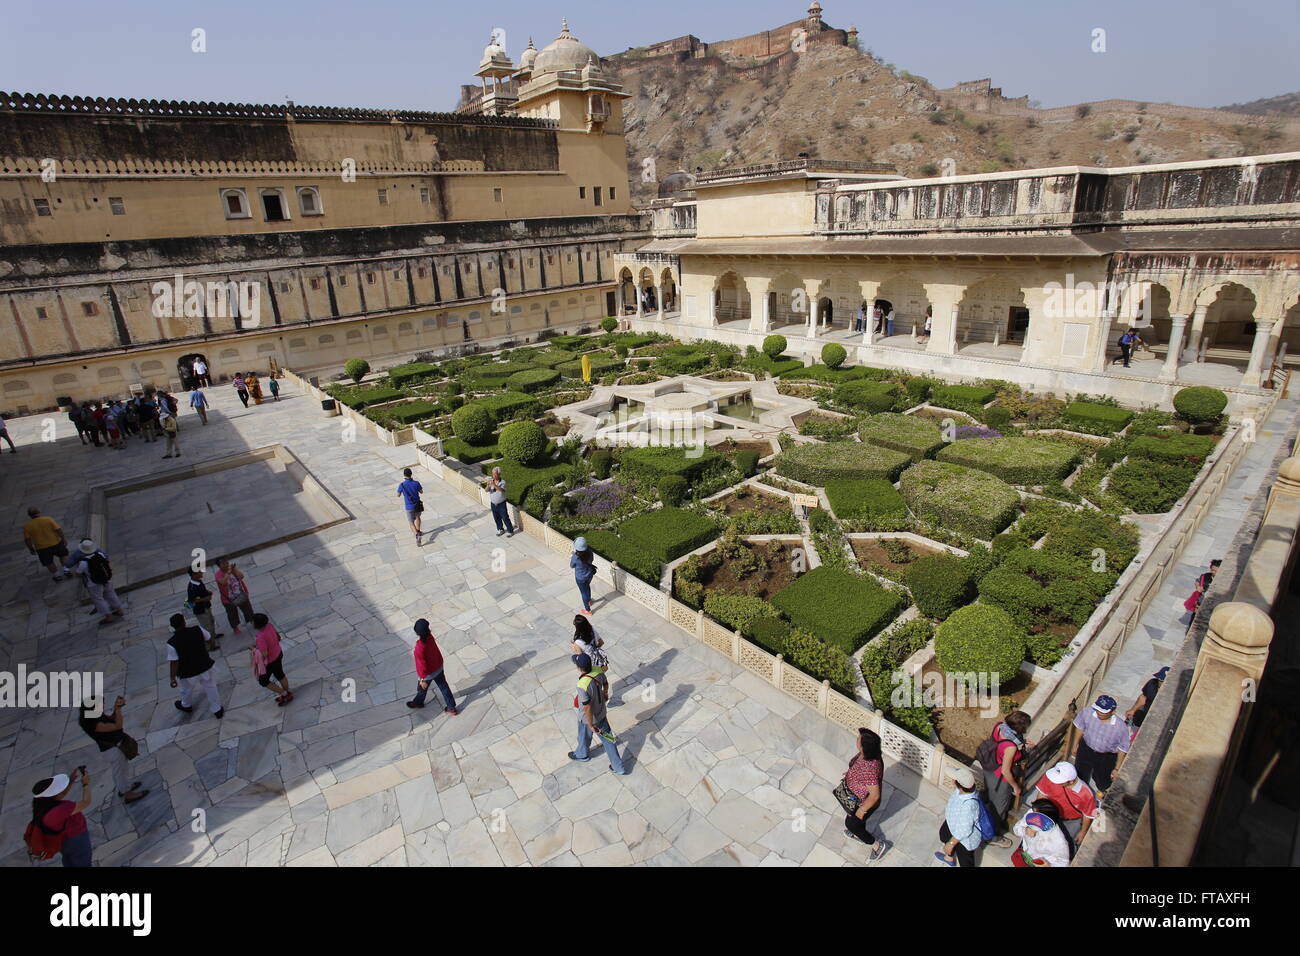 The gardens at the Amber Fort, Jaipur, Rajasthan, India Stock Photo